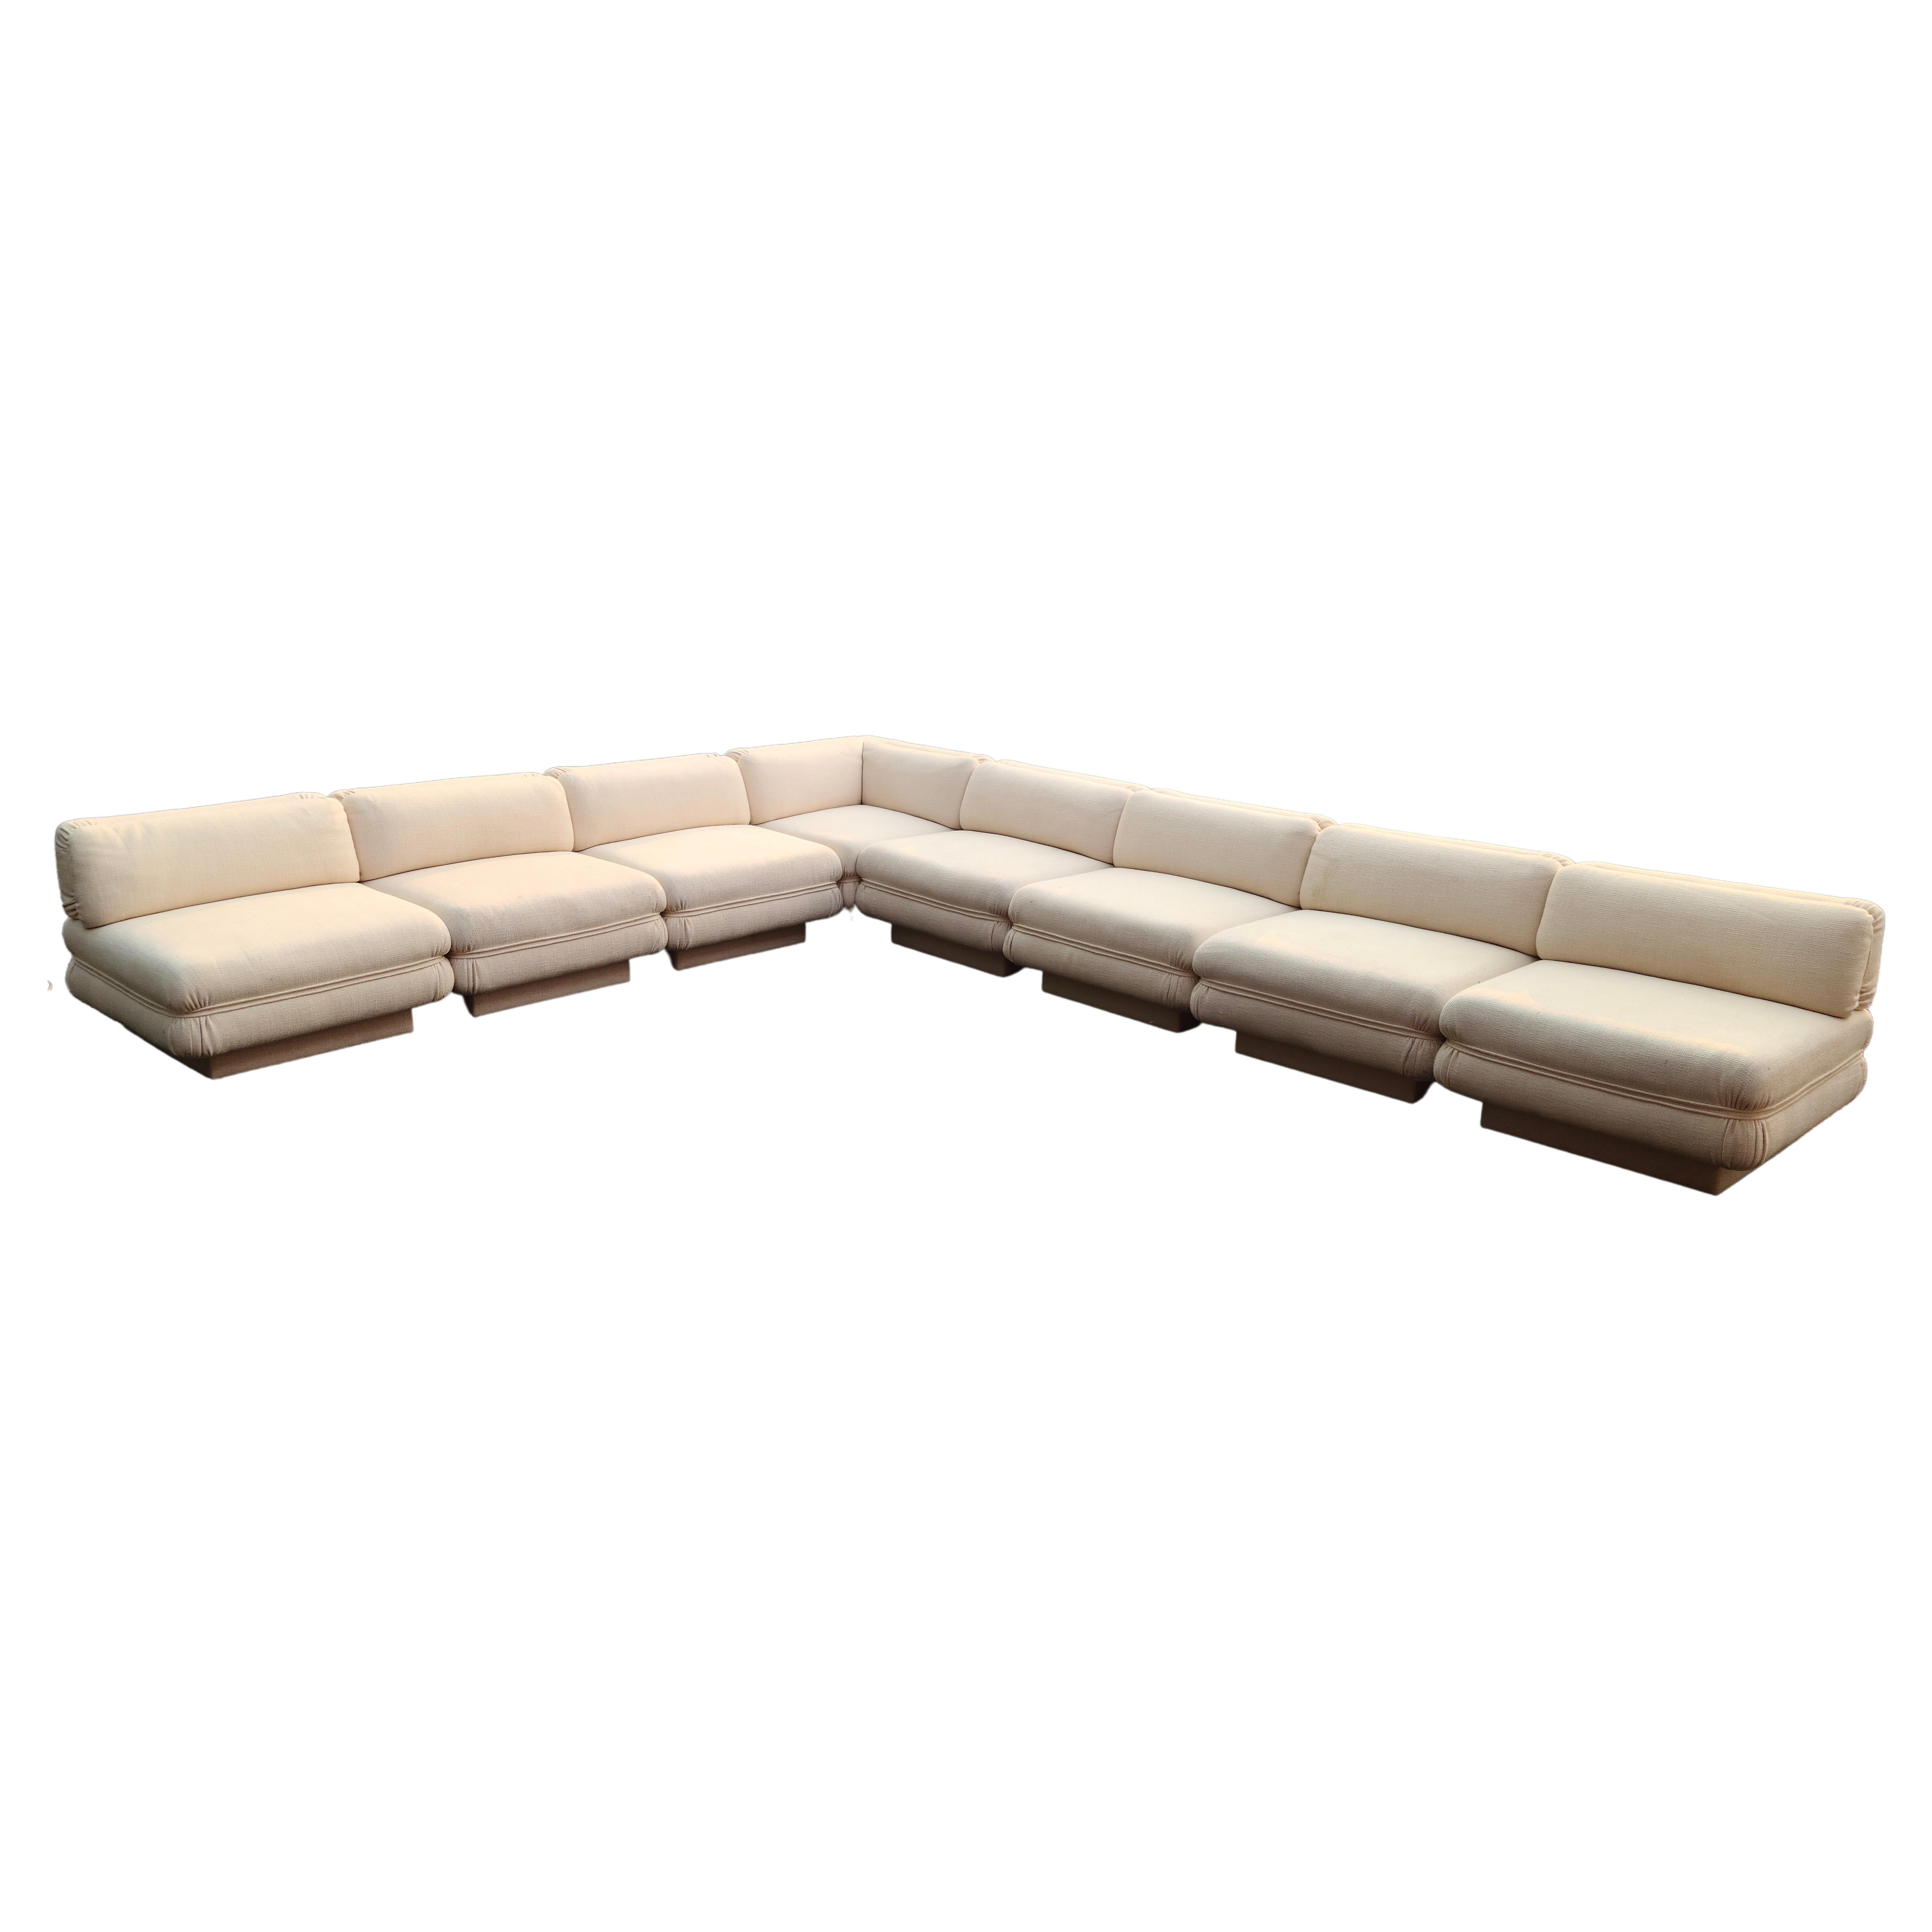 Harvey Probber 8 Piece Sectional Sofa For Sale 6